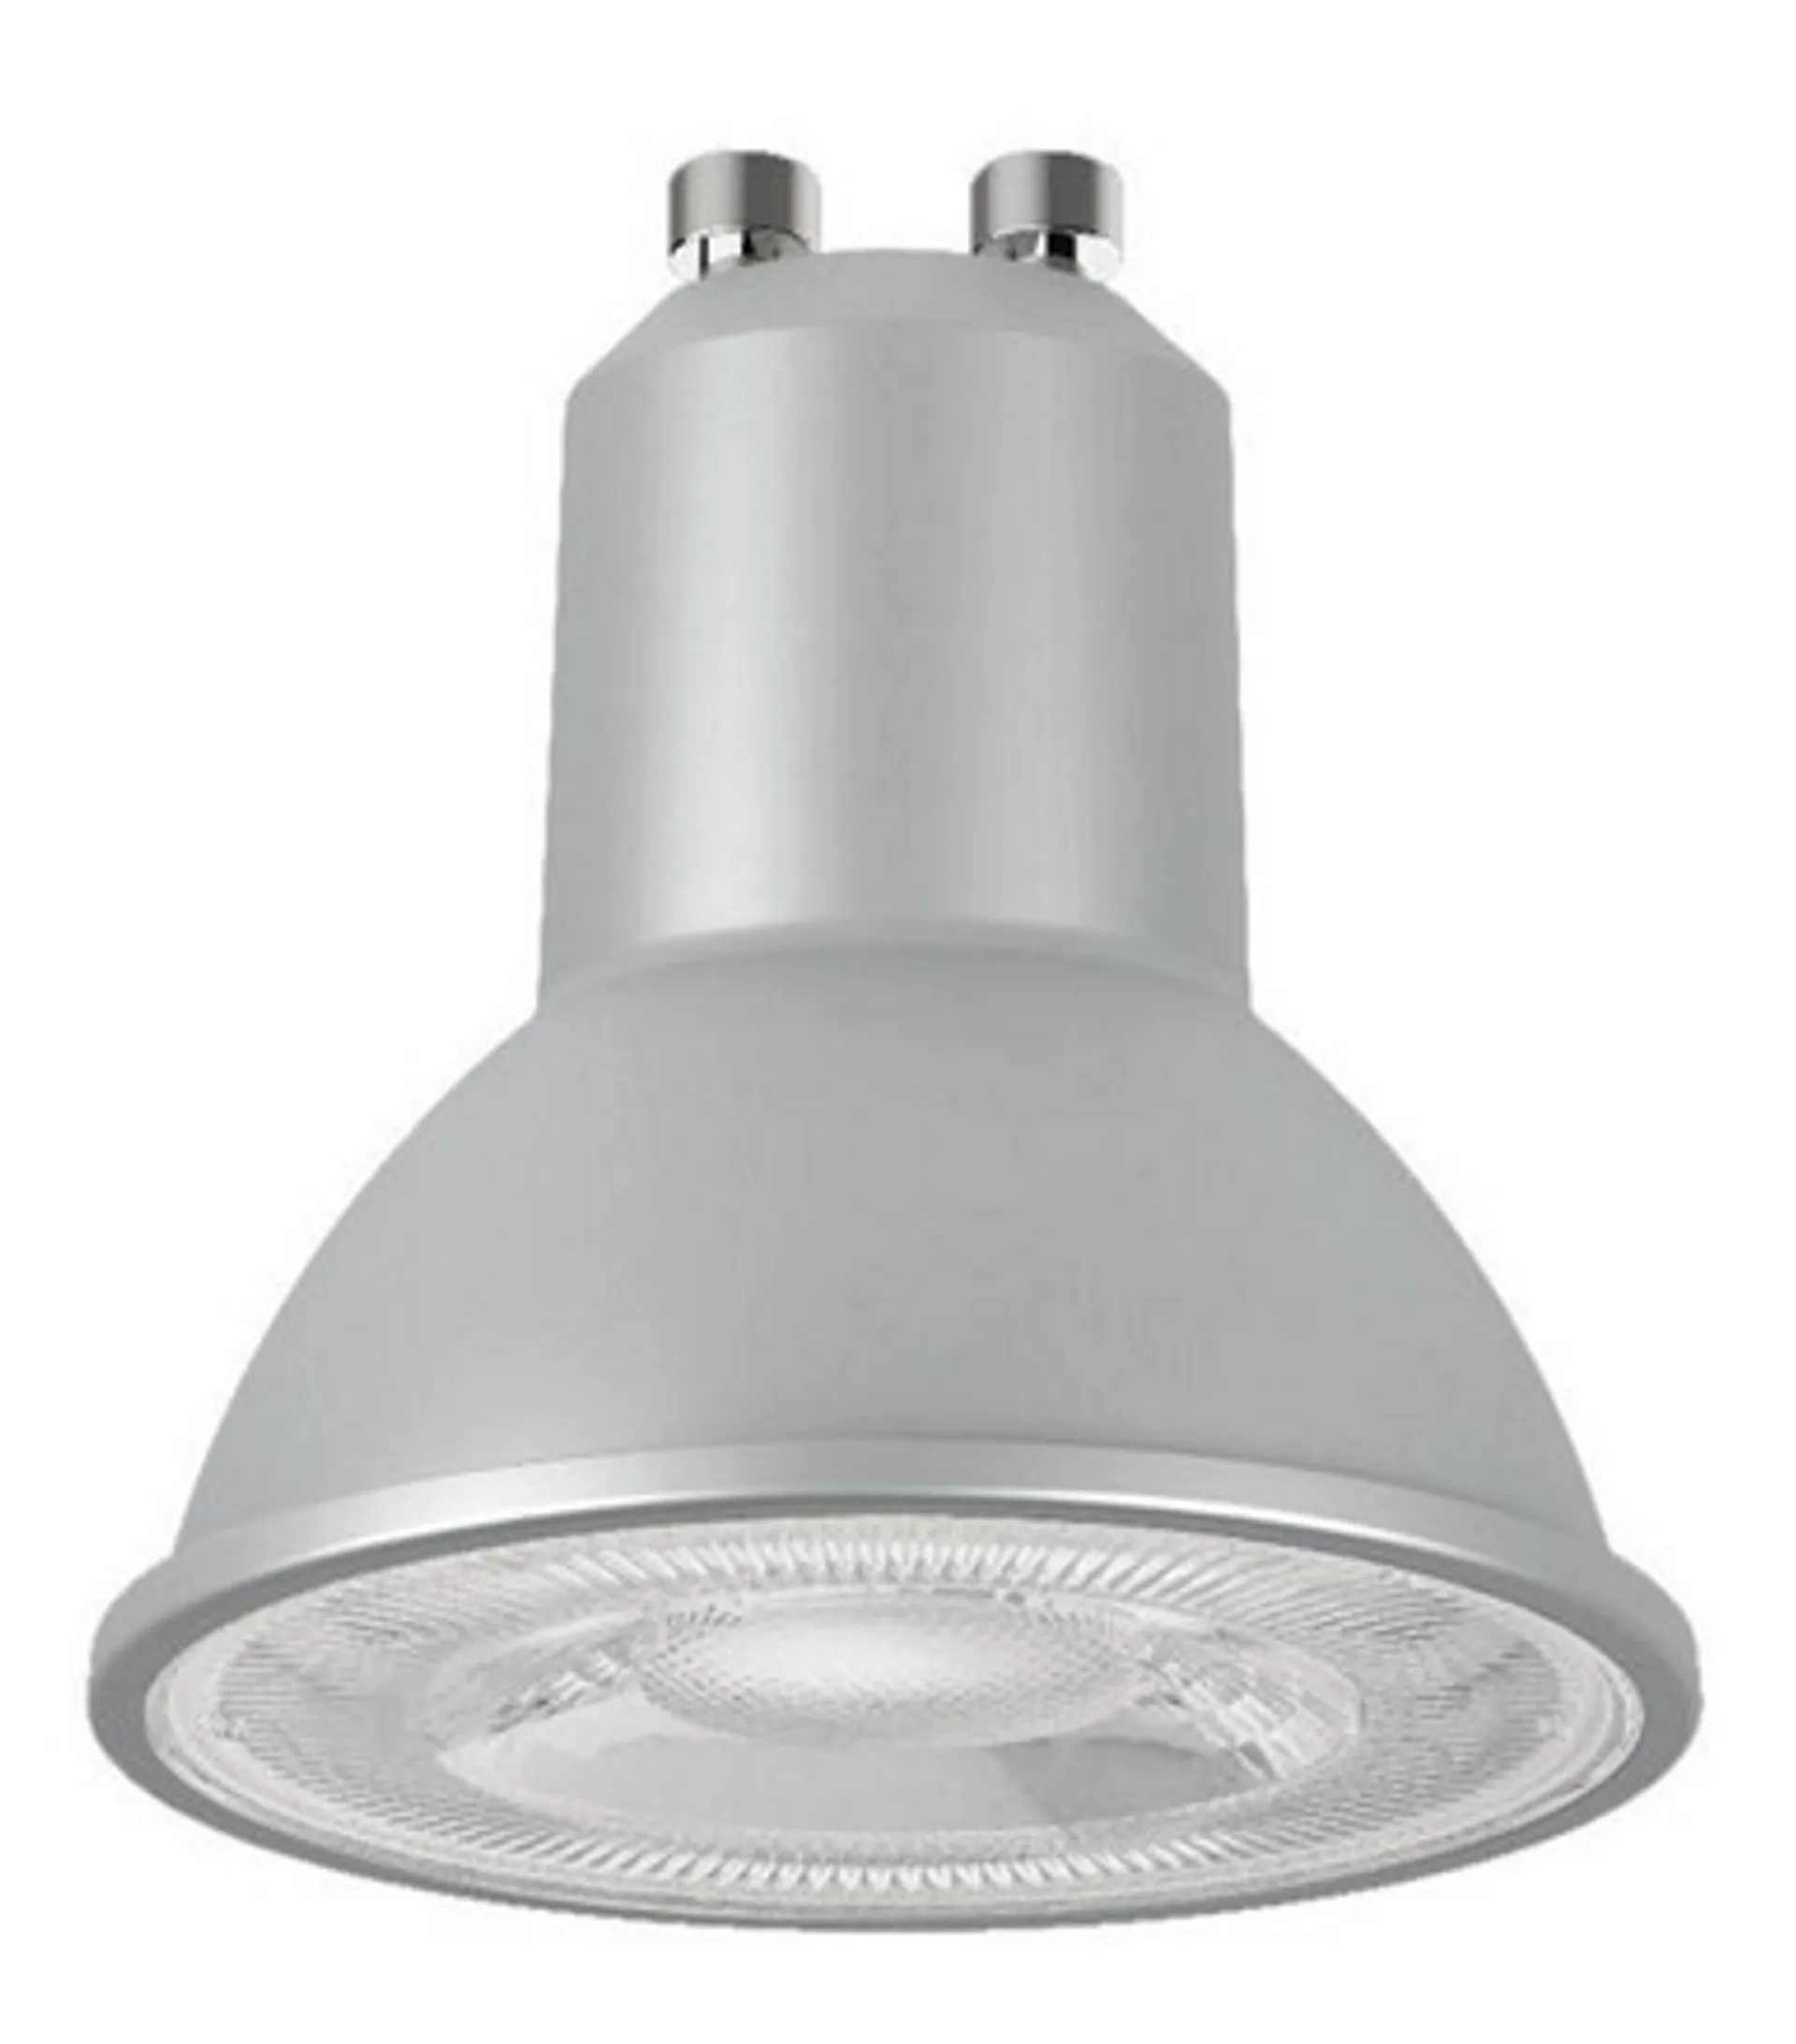 LED 5.7W GU10 600lm 4000k Dimmable